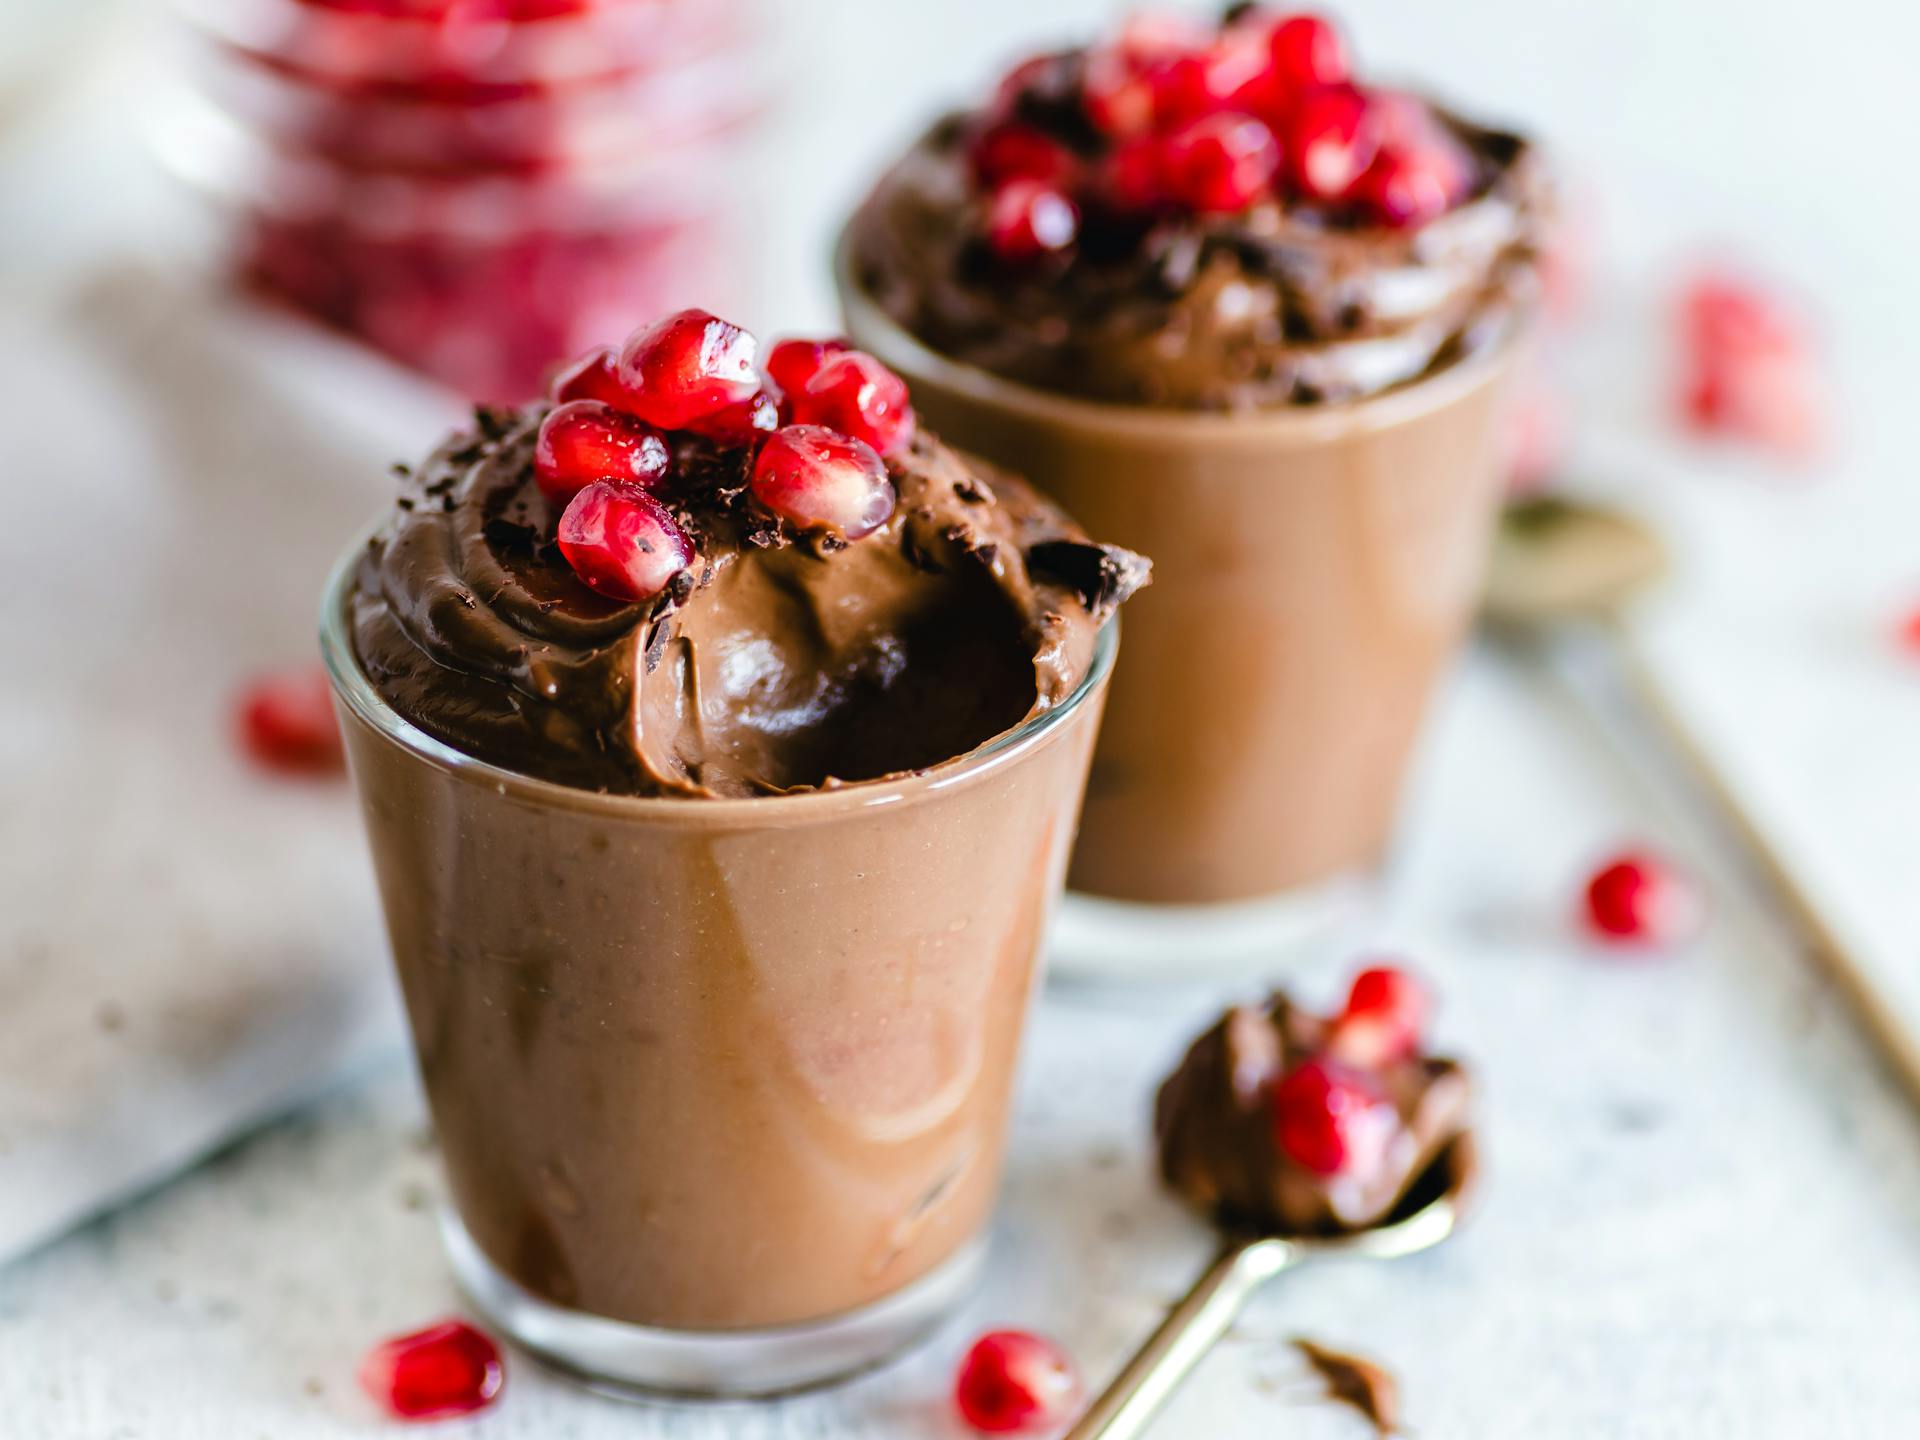 A close-up of chocolate mousse | Source: Pexels